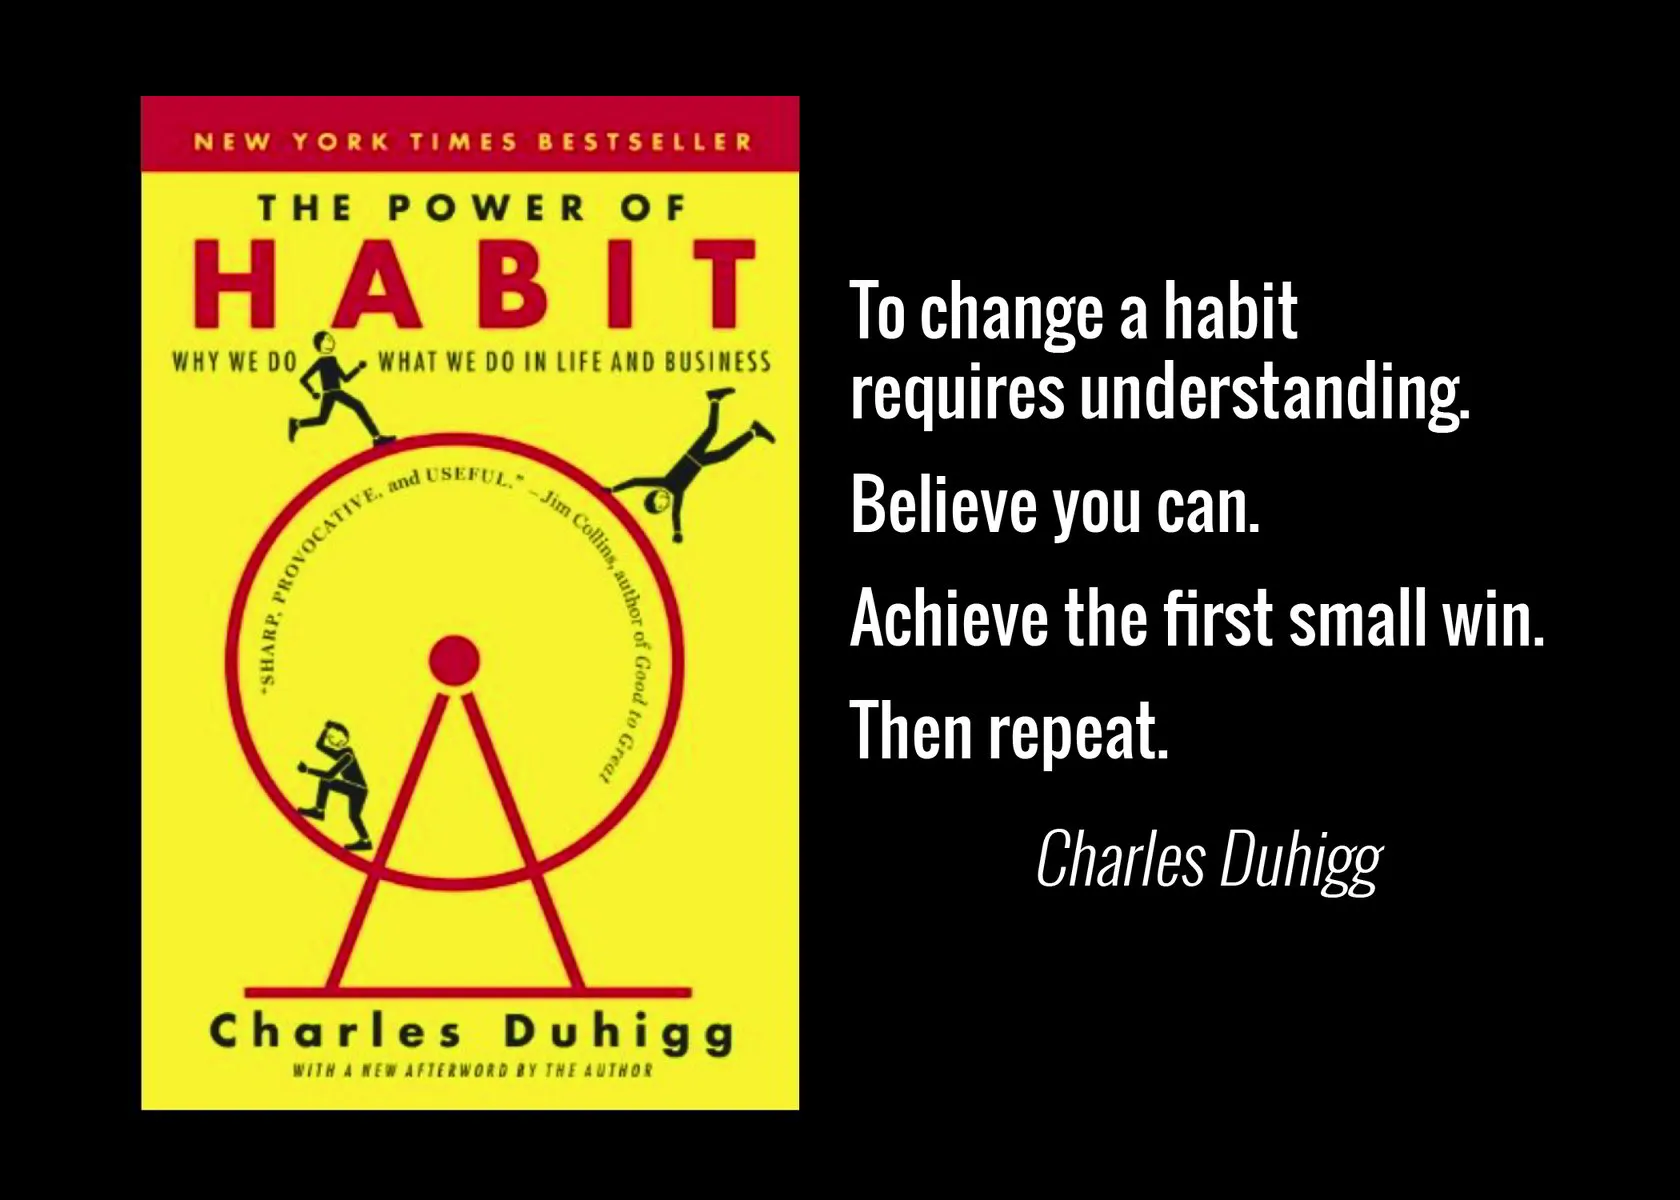 We're Not Doomed! Habits Can Change!